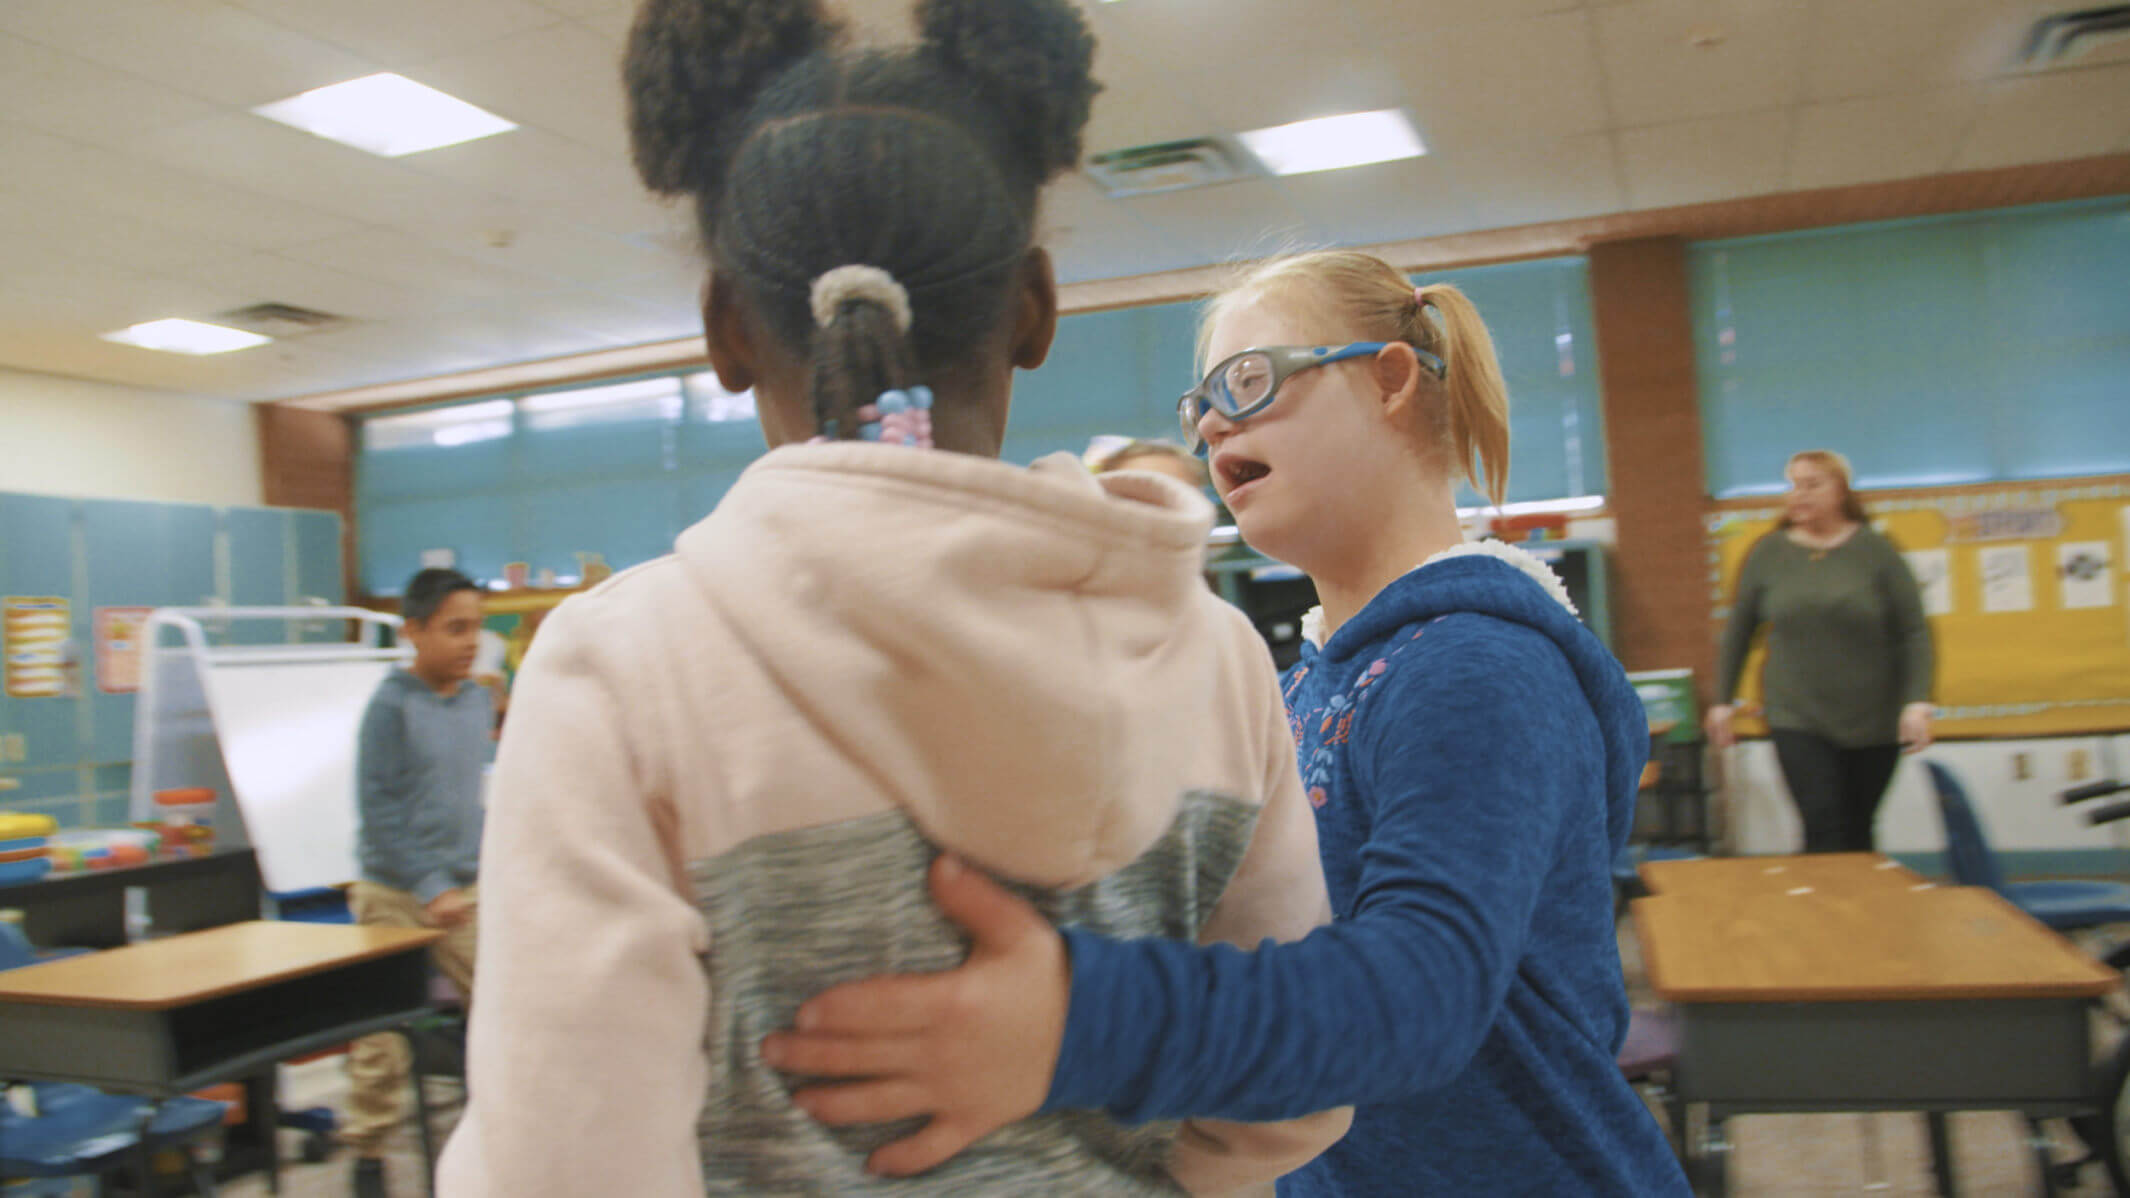 A student from Copper King Elementary puts her arm around another student.